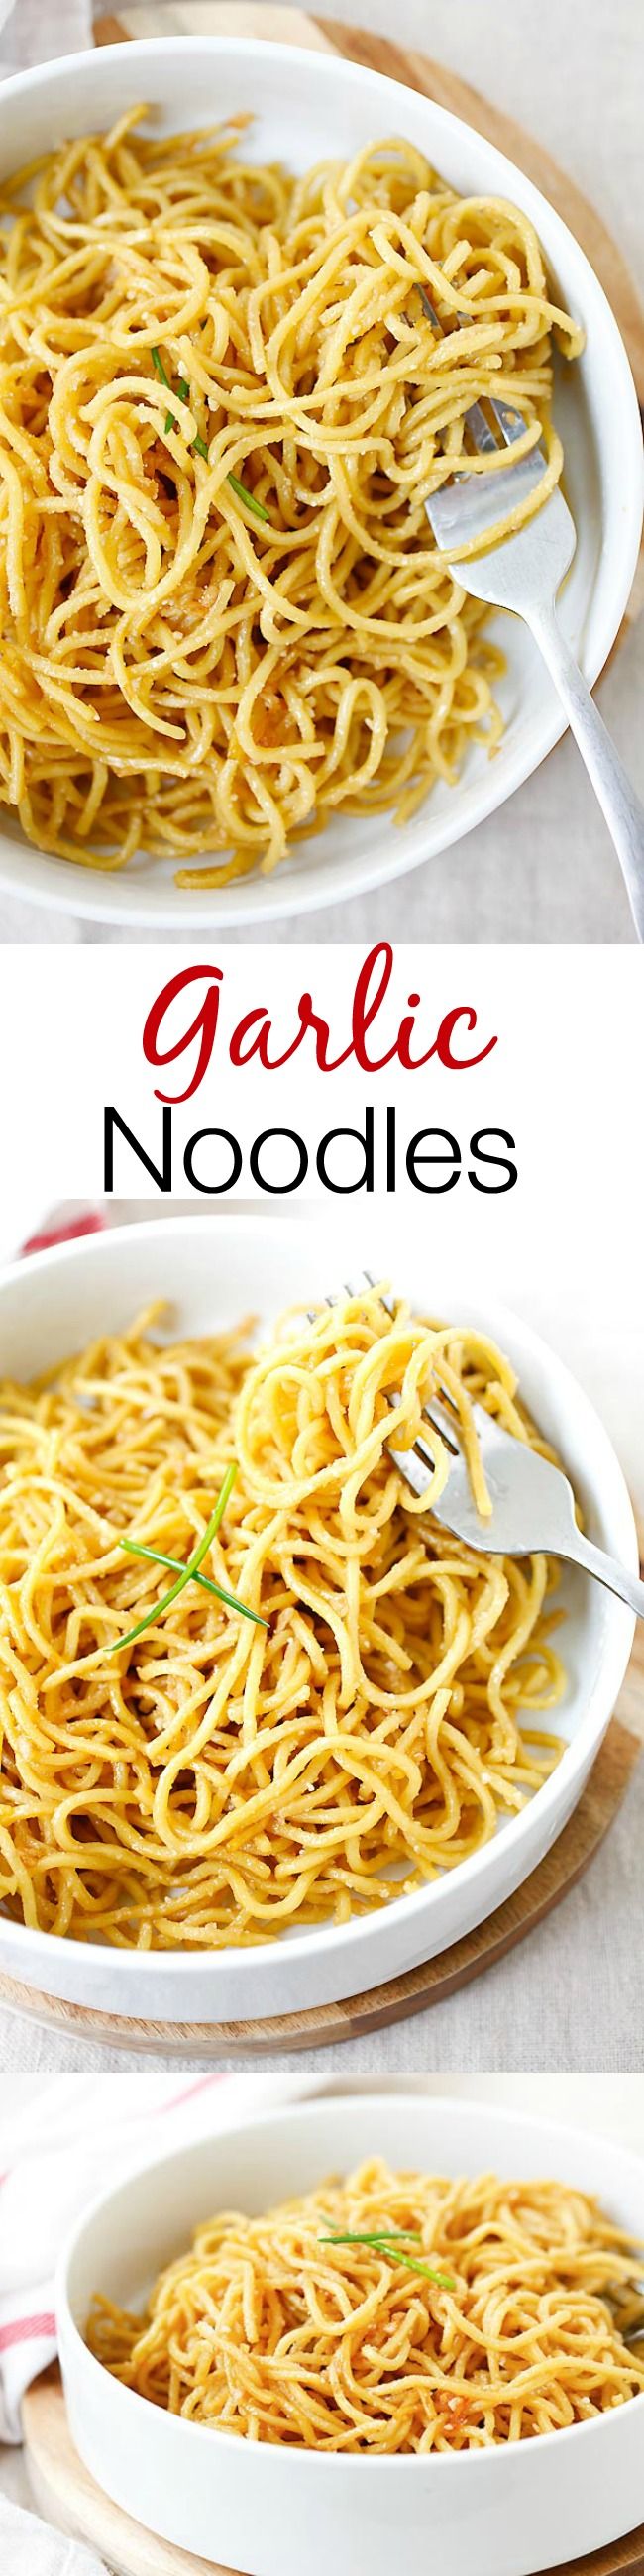 Garlic Noodles - the easiest and best noodles with garlic, butter, Parmesan cheese and Asian sauces. So good and so easy to make!